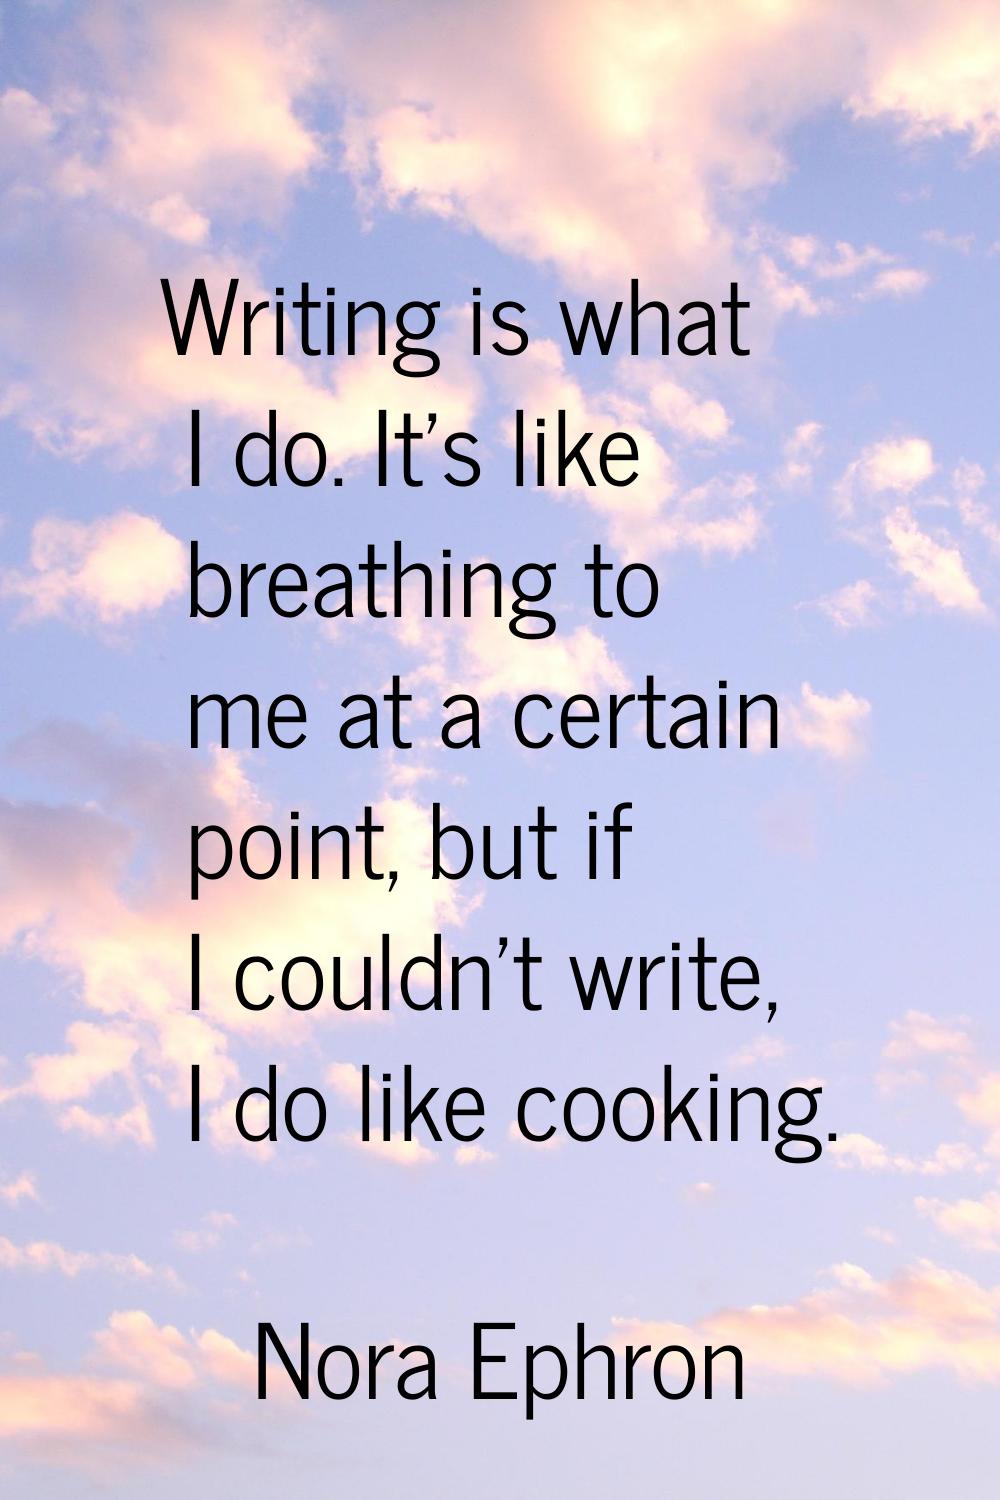 Writing is what I do. It's like breathing to me at a certain point, but if I couldn't write, I do l